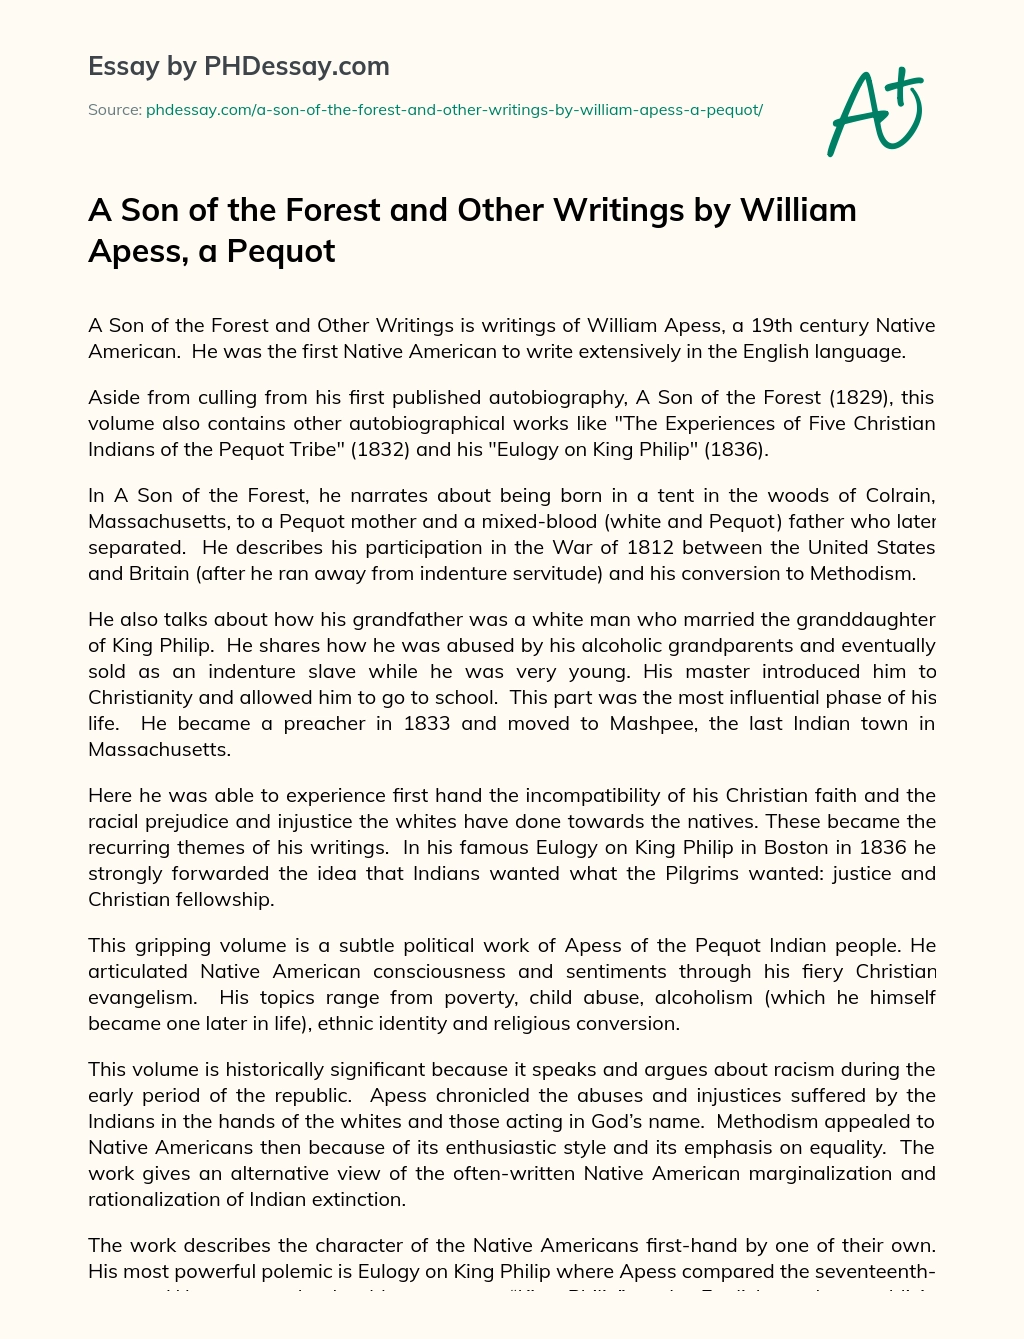 A Son of the Forest and Other Writings by William Apess, a Pequot essay